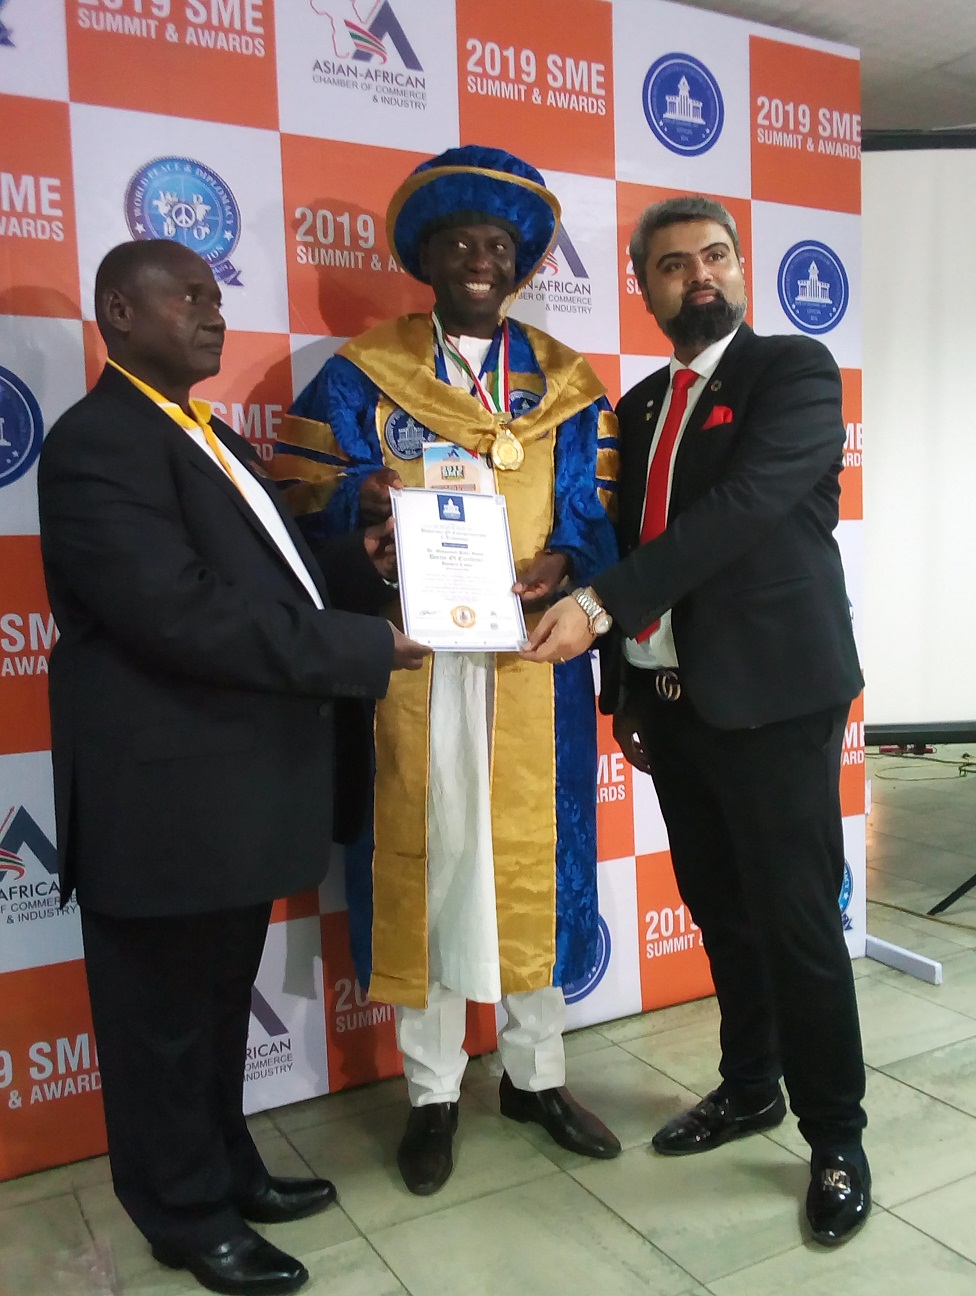 dr-mohammed-bawa-gummi-leaving-ceremony-with-honorary-doctoral-award-from-the-uet-during-2019-sme-summit-held-in-lagos-on-saturday-27-april-2019